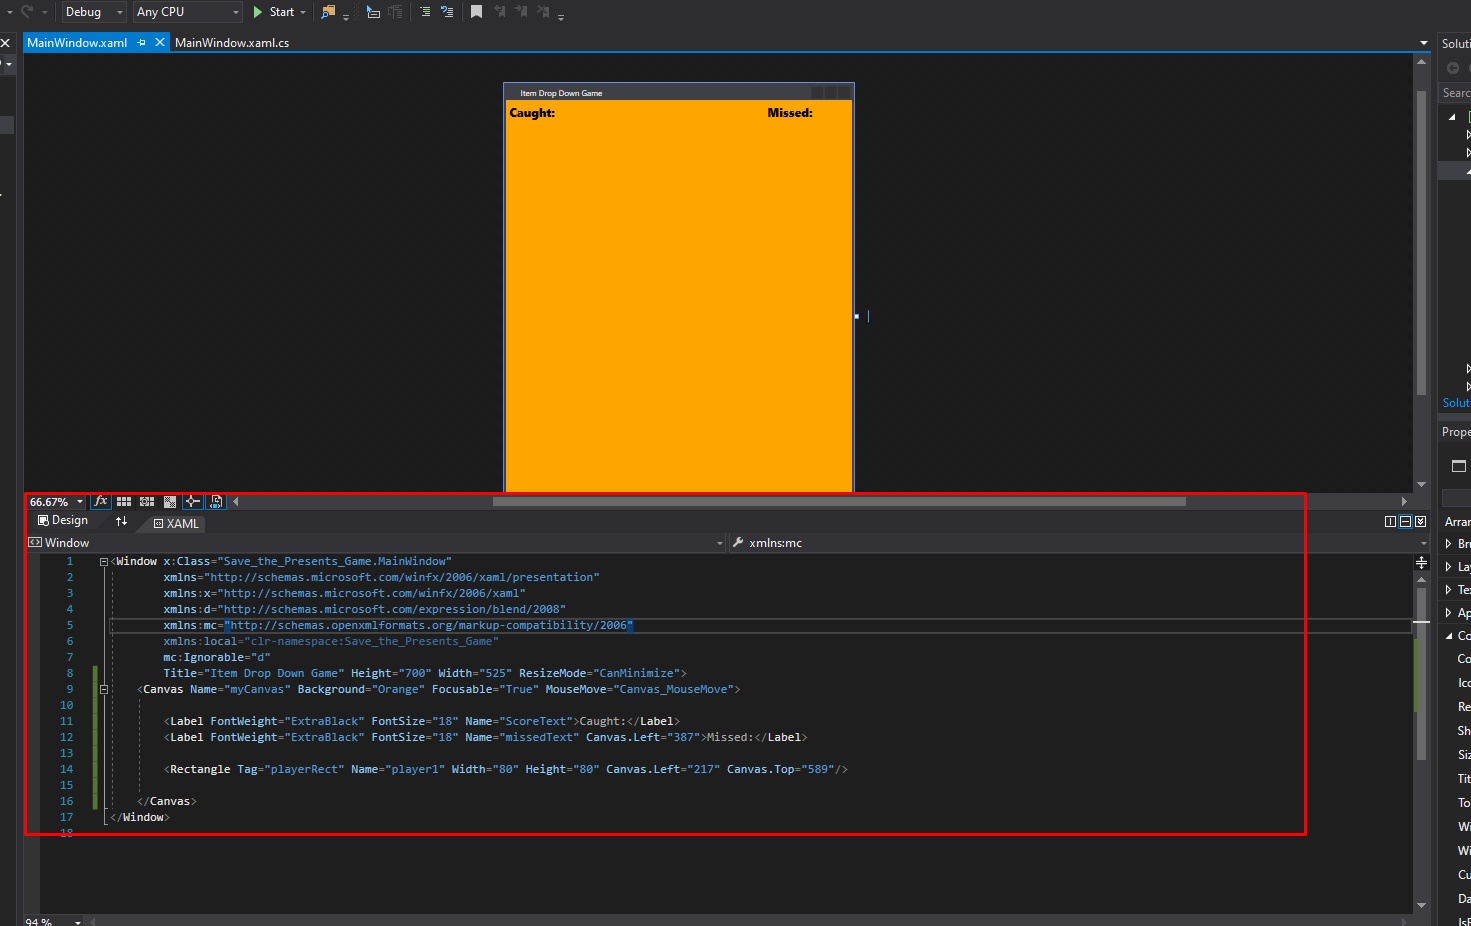 mooict wpf c# save the presents game - preview of window after xaml code change in visual studio